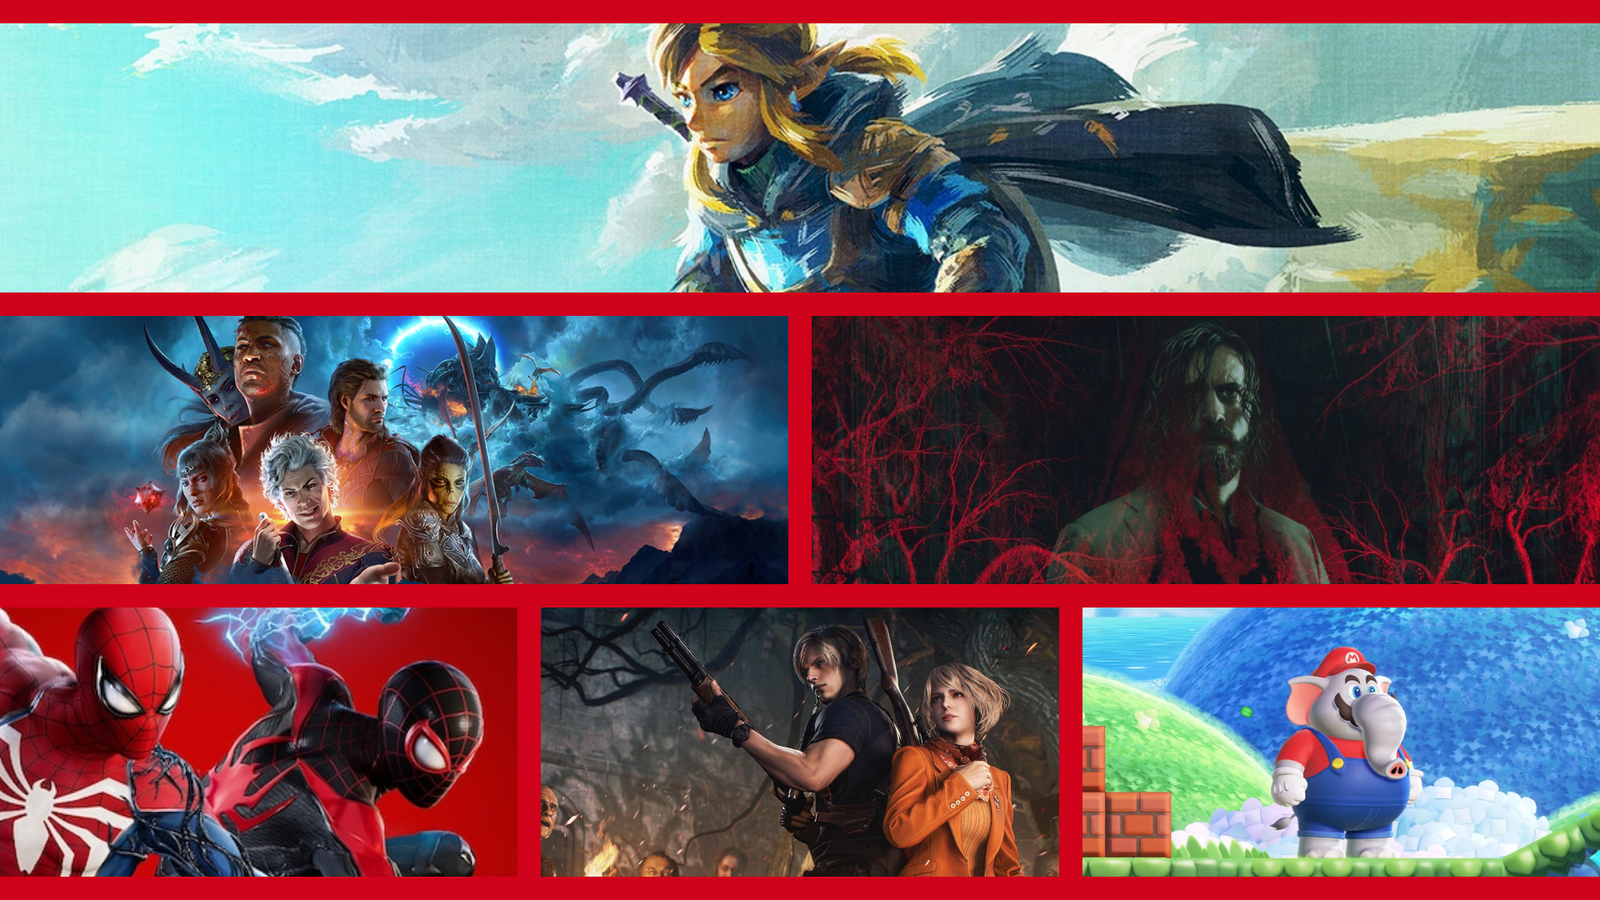 The Game Awards on X: Here are the most nominated games at